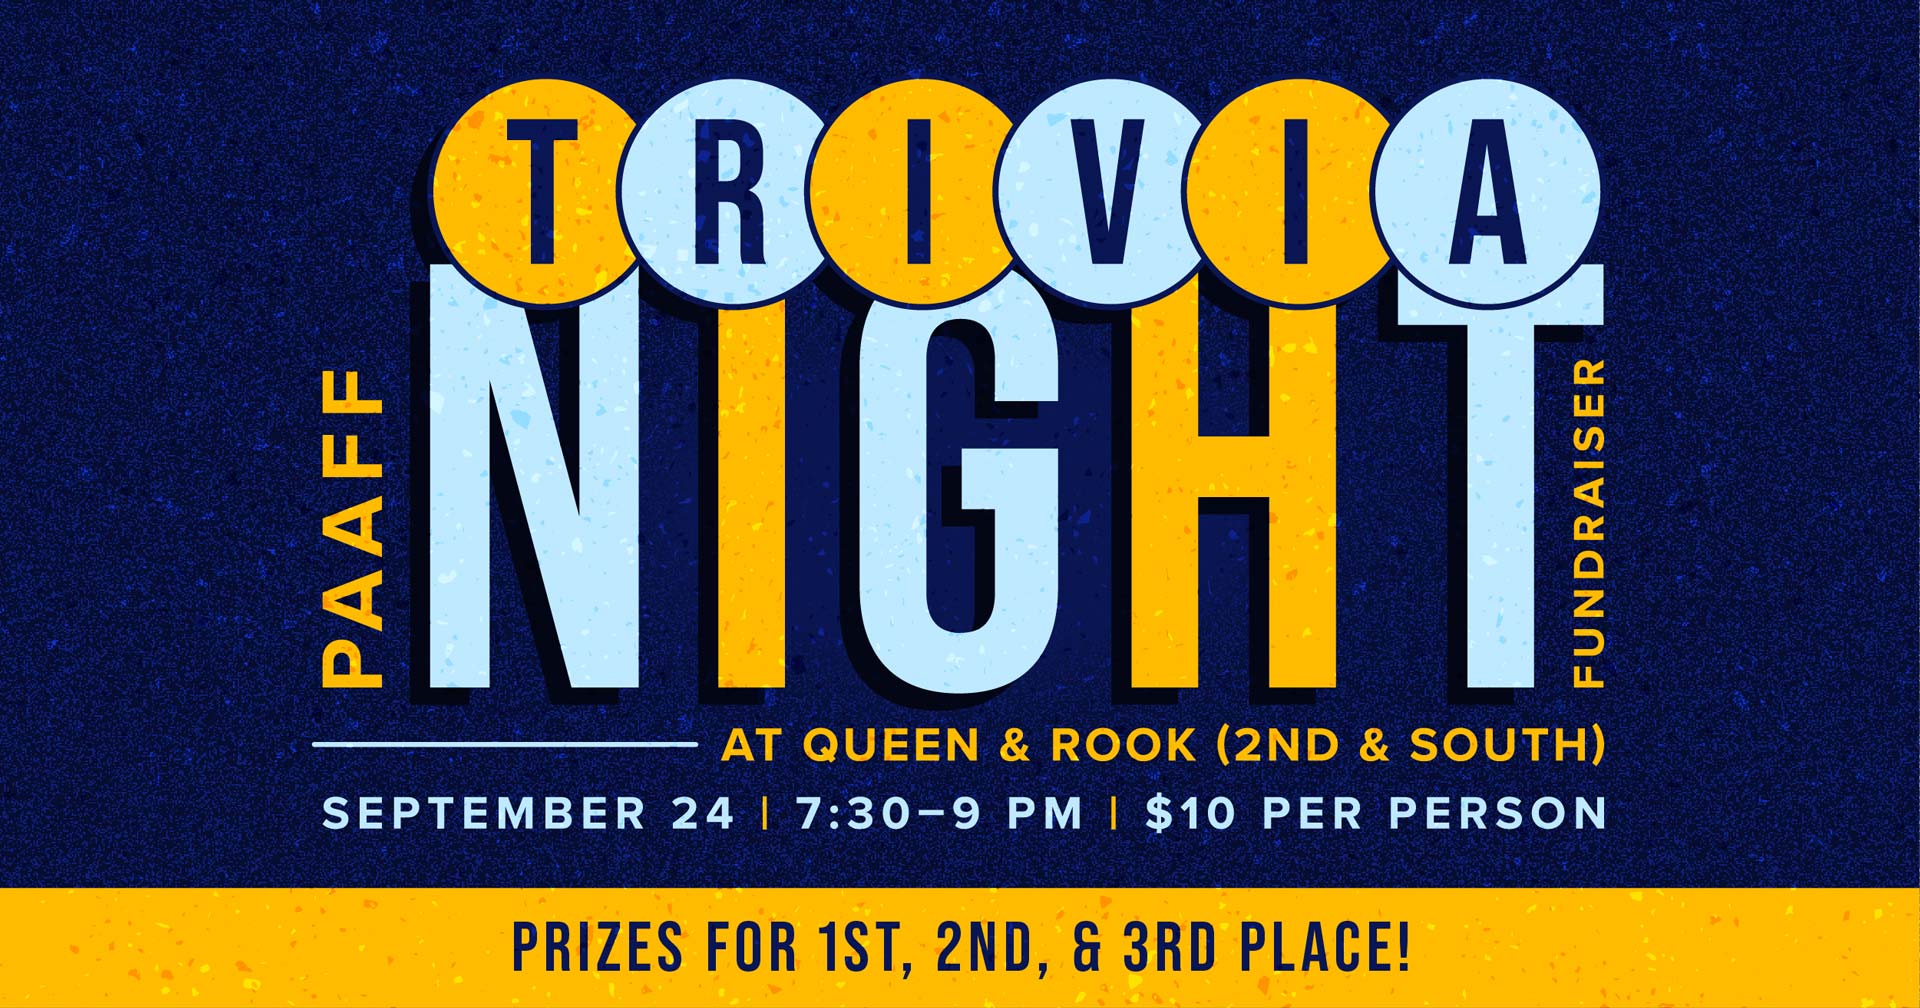 PAAFF Trivia Night graphic reads, "PAAFF Trivia Night Fundraiser at Queen & Rook (2nd & South). September 24 | 7:30–9 PM | $10 per person." Yellow bar below reads, "Prizes for 1st, 2nd, & 3rd place!"